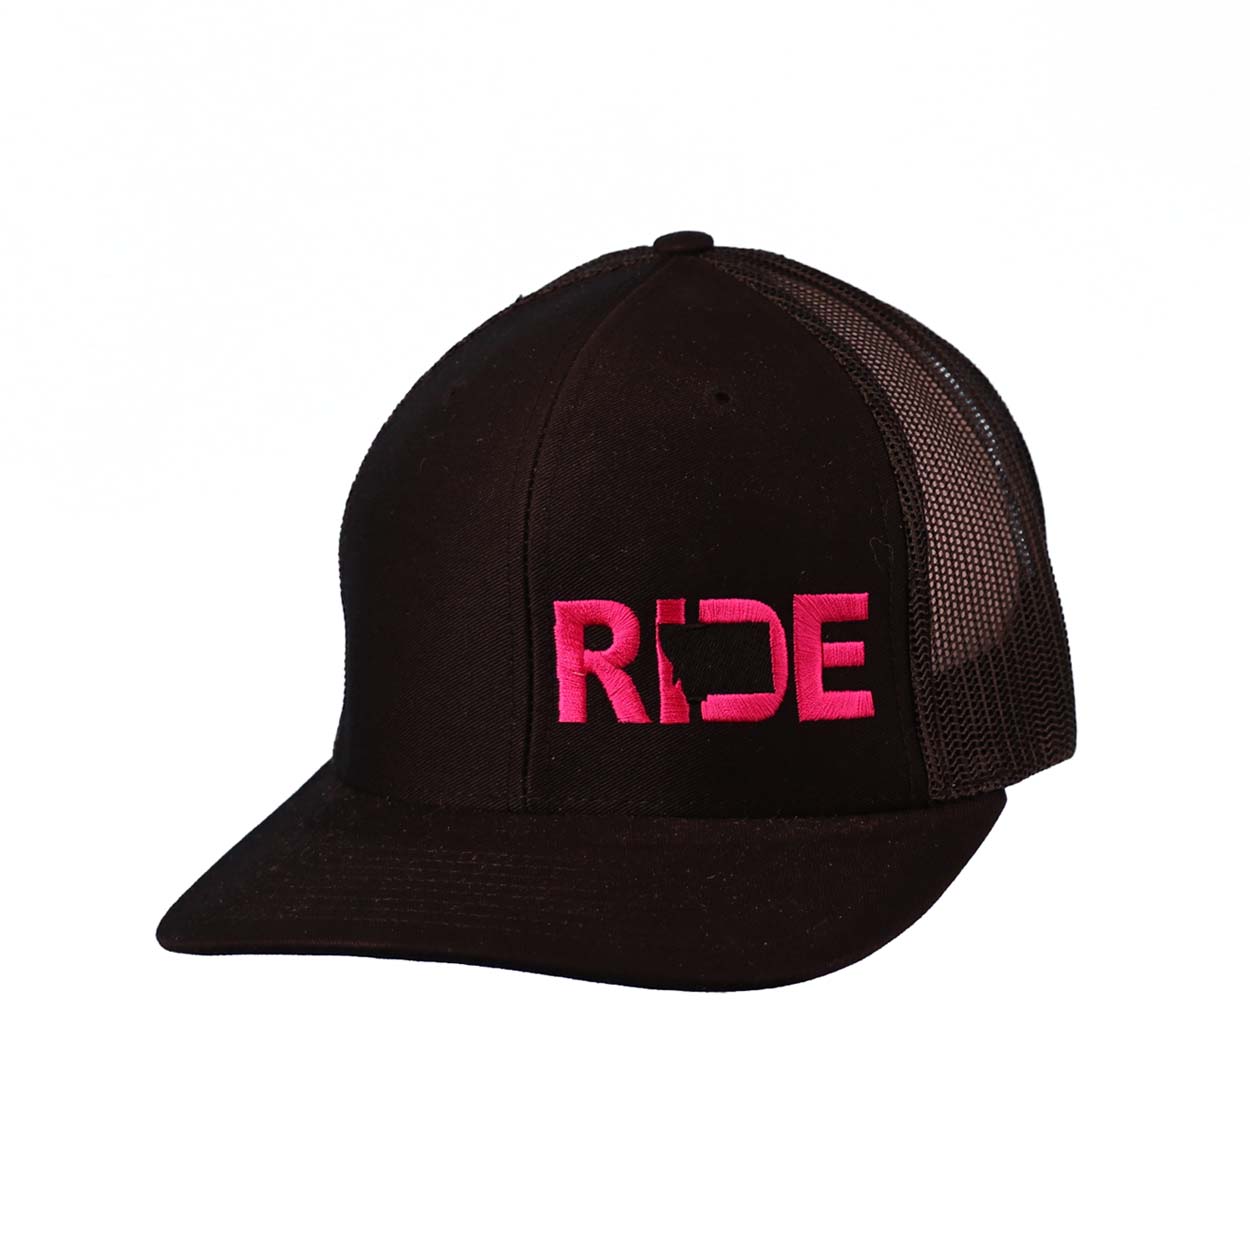 Ride Montana Night Out Pro Embroidered Snapback Trucker Hat Black/Pink